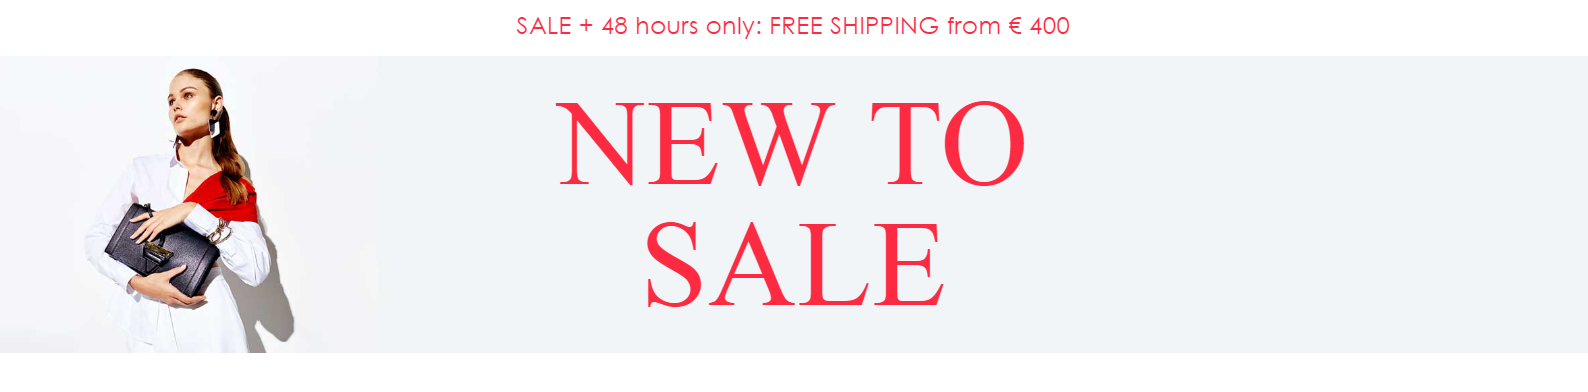 mytheresa.com   New to sale   Sale   Luxury Fashion for Women   Designer clothing  shoes  bags